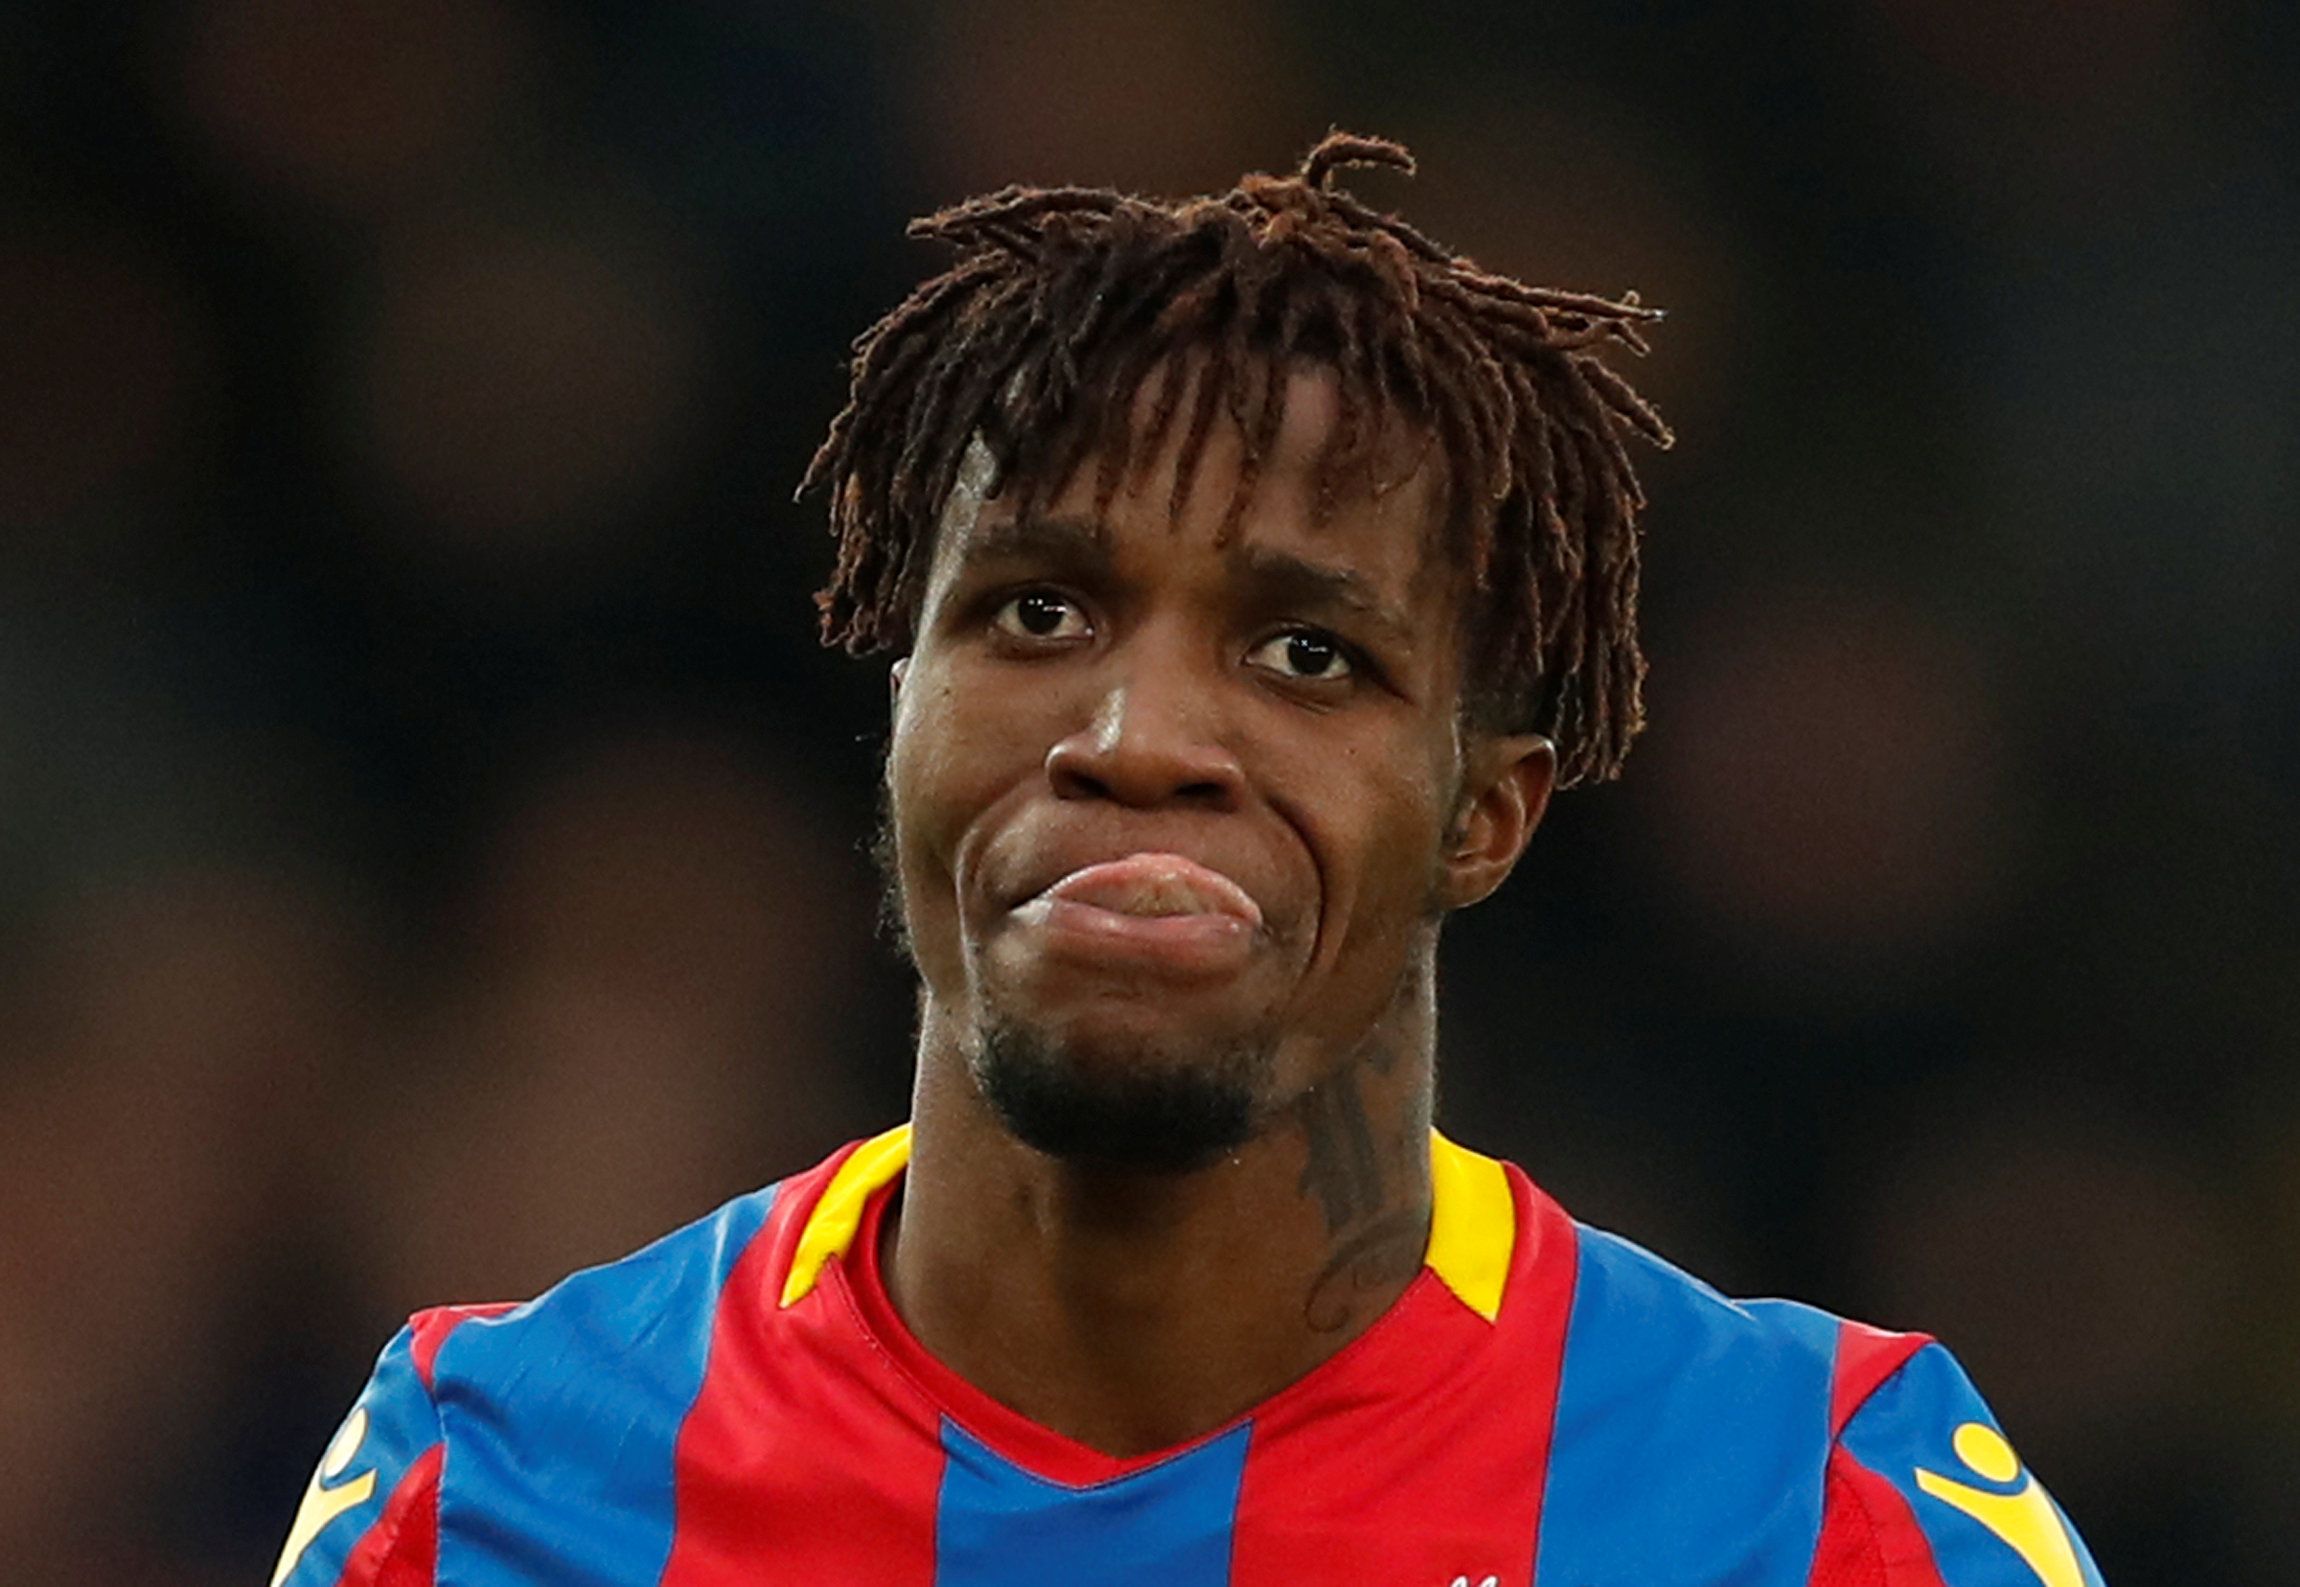 Soccer Football - Premier League - Crystal Palace vs Newcastle United - Selhurst Park, London, Britain - February 4, 2018   Crystal Palace's Wilfried Zaha            Action Images via Reuters/Matthew Childs    EDITORIAL USE ONLY. No use with unauthorized audio, video, data, fixture lists, club/league logos or "live" services. Online in-match use limited to 75 images, no video emulation. No use in betting, games or single club/league/player publications.  Please contact your account representativ